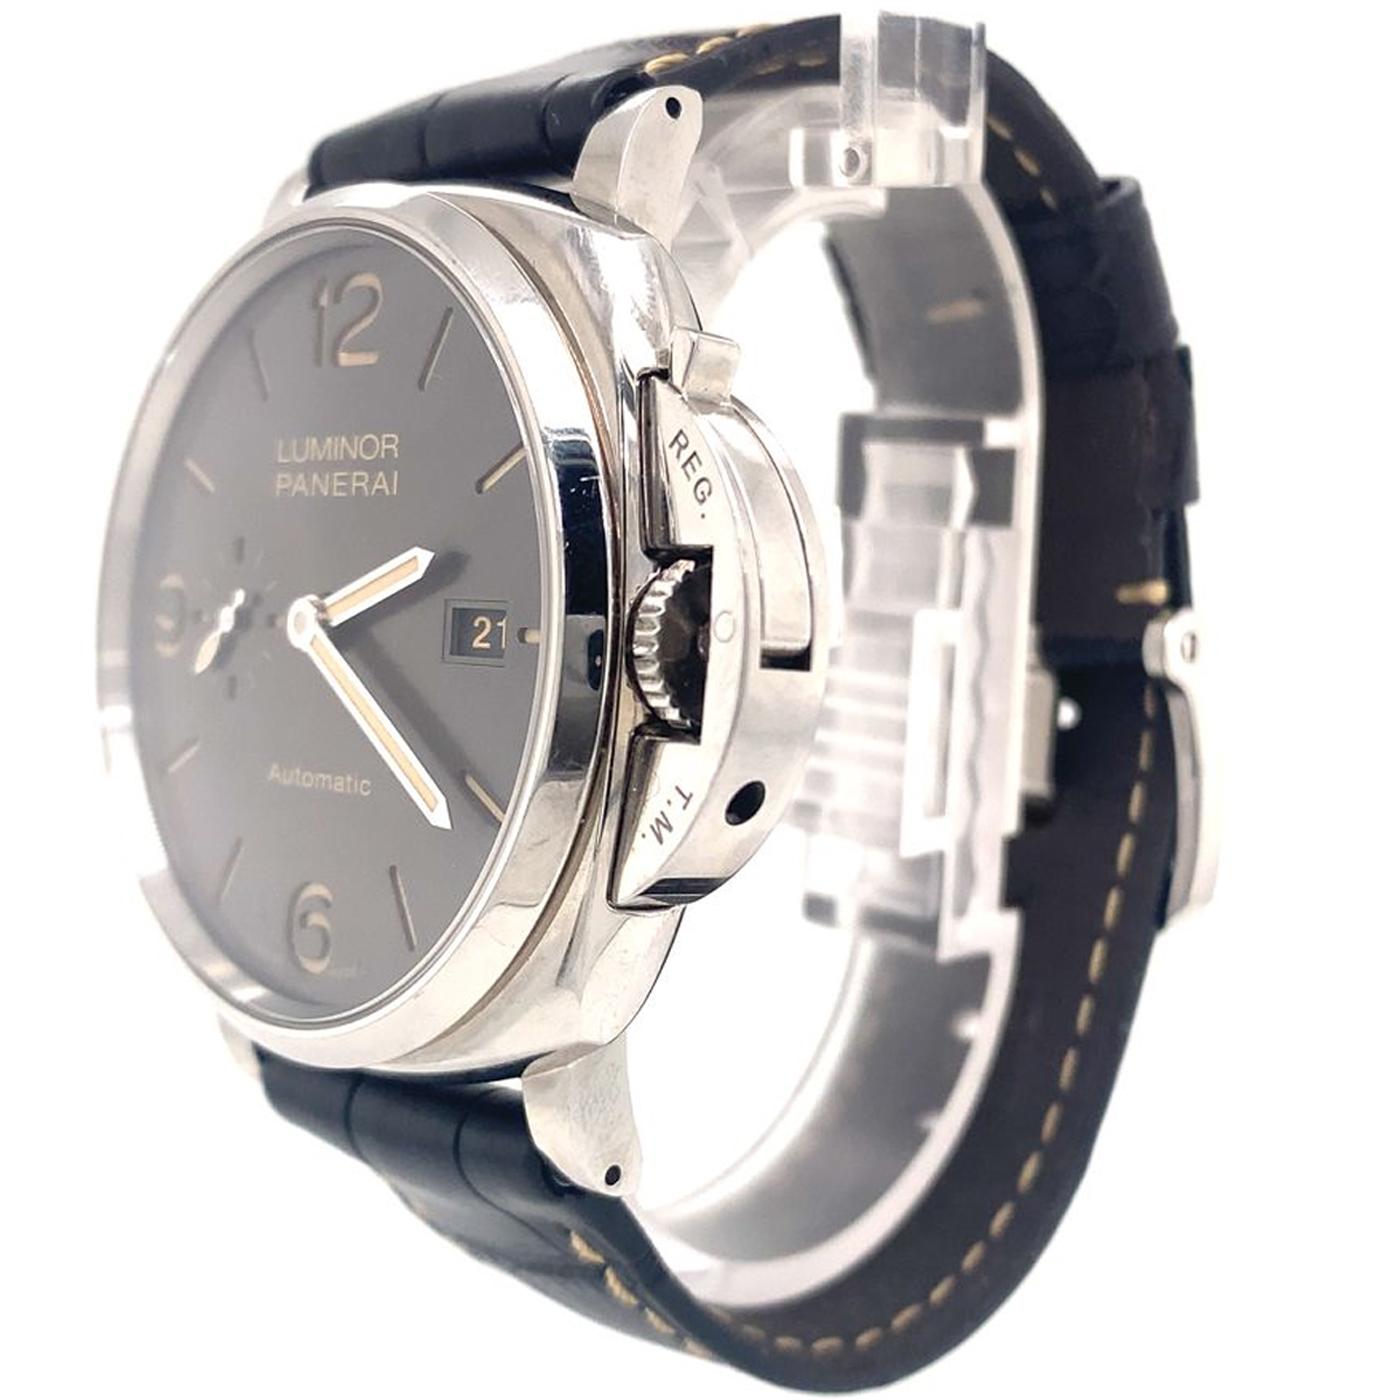 Modernist Panerai Luminor Due 45mm Automatic Grey Dial Men's Watch PAM00943 For Sale